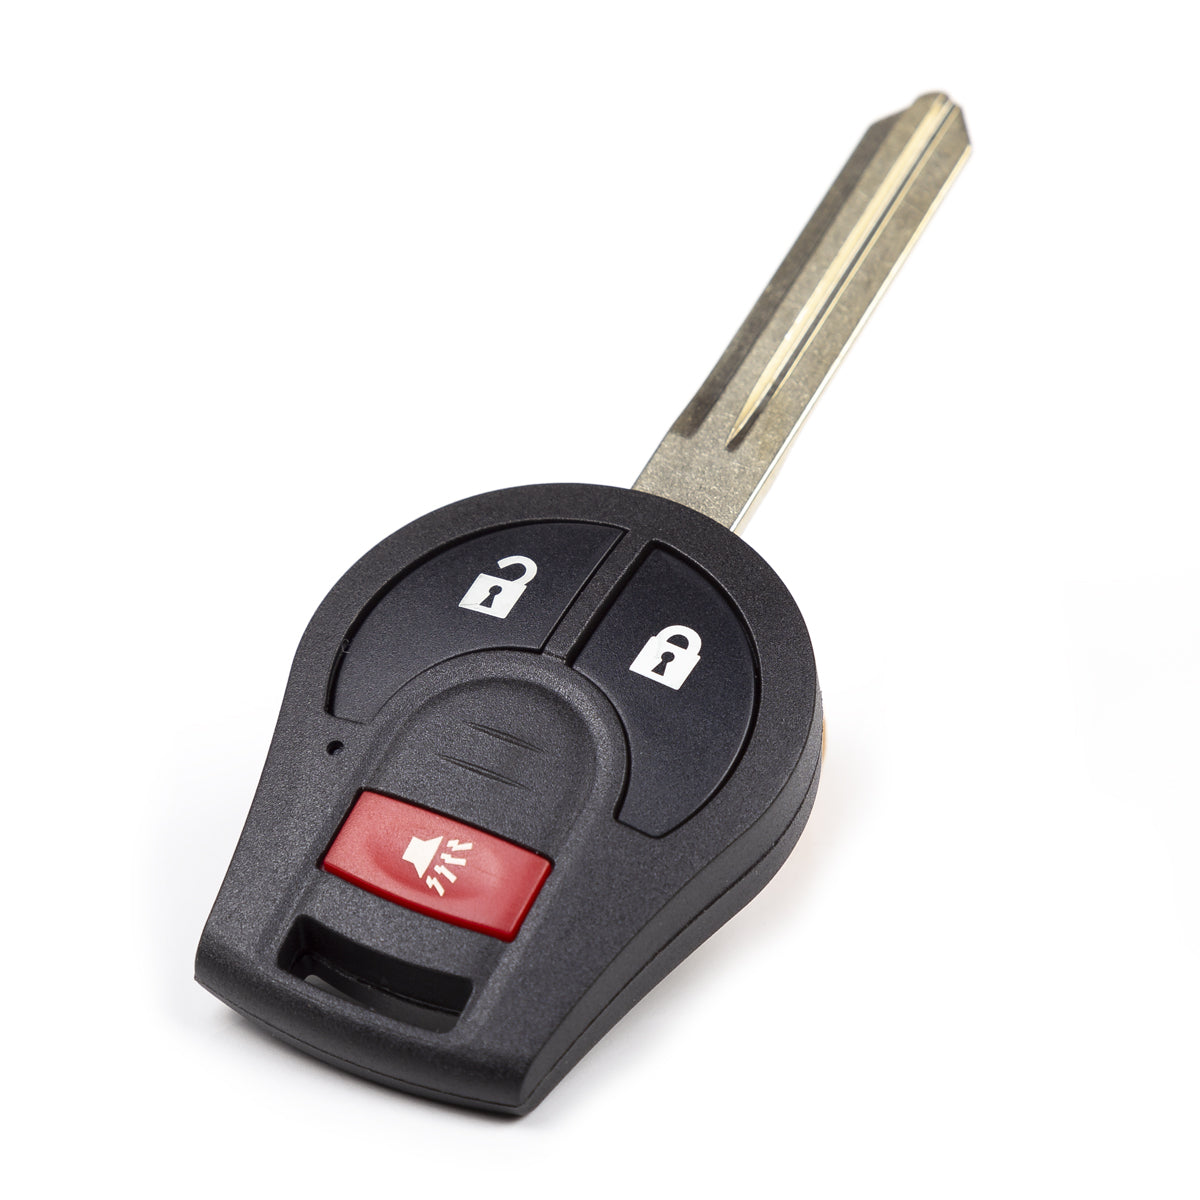 2006 Nissan Quest Key Fob Replacement - Aftermarket - 3 Buttons Fob FCC# CWTWB1U751